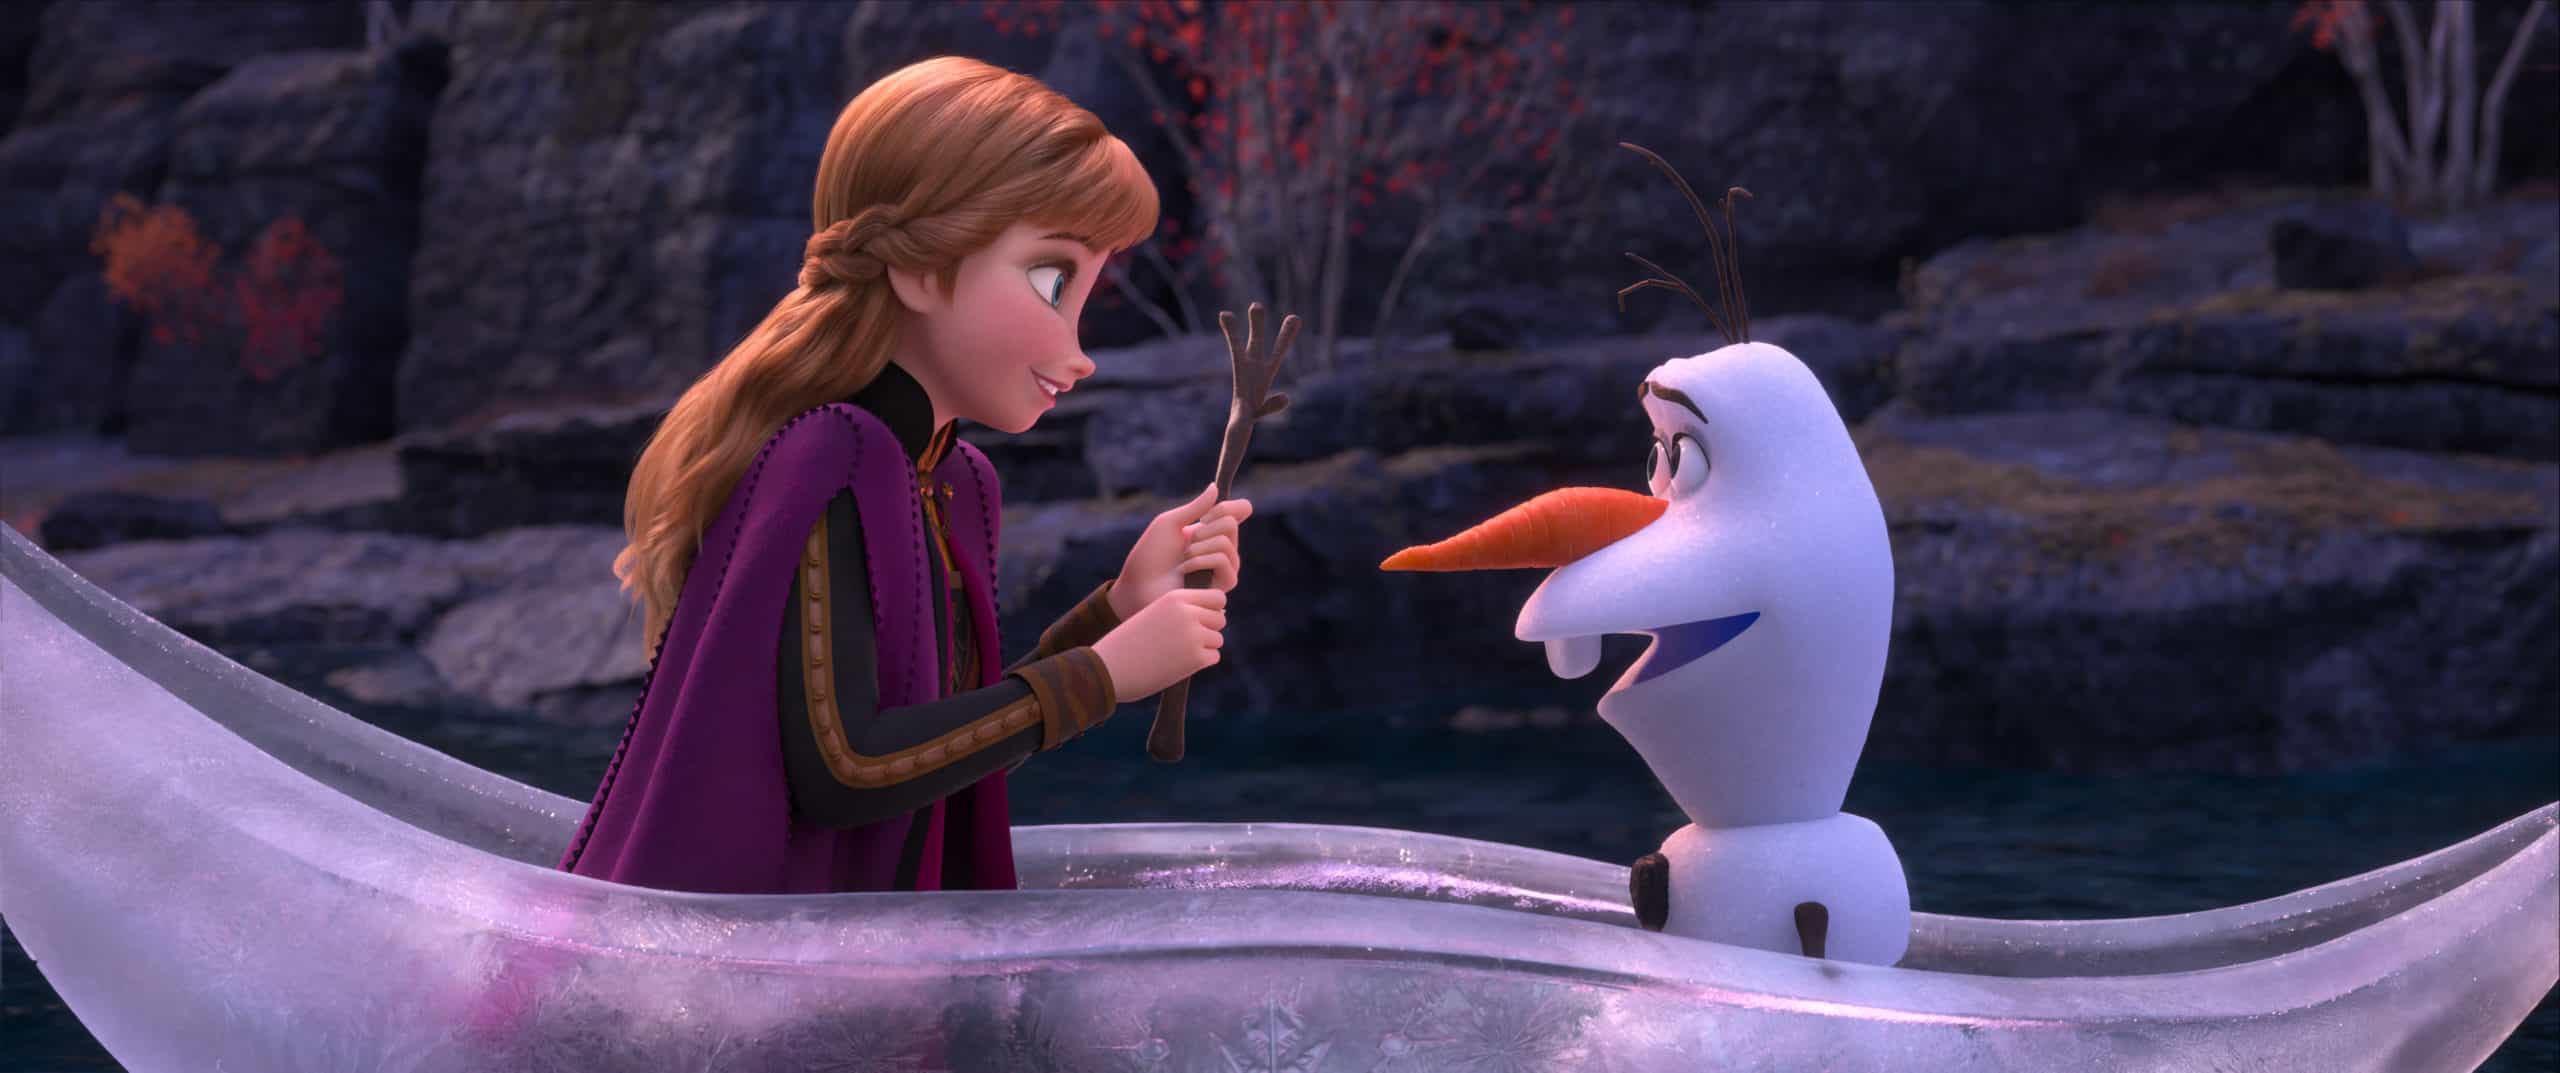 Anna and Olaf in a boat made of ice